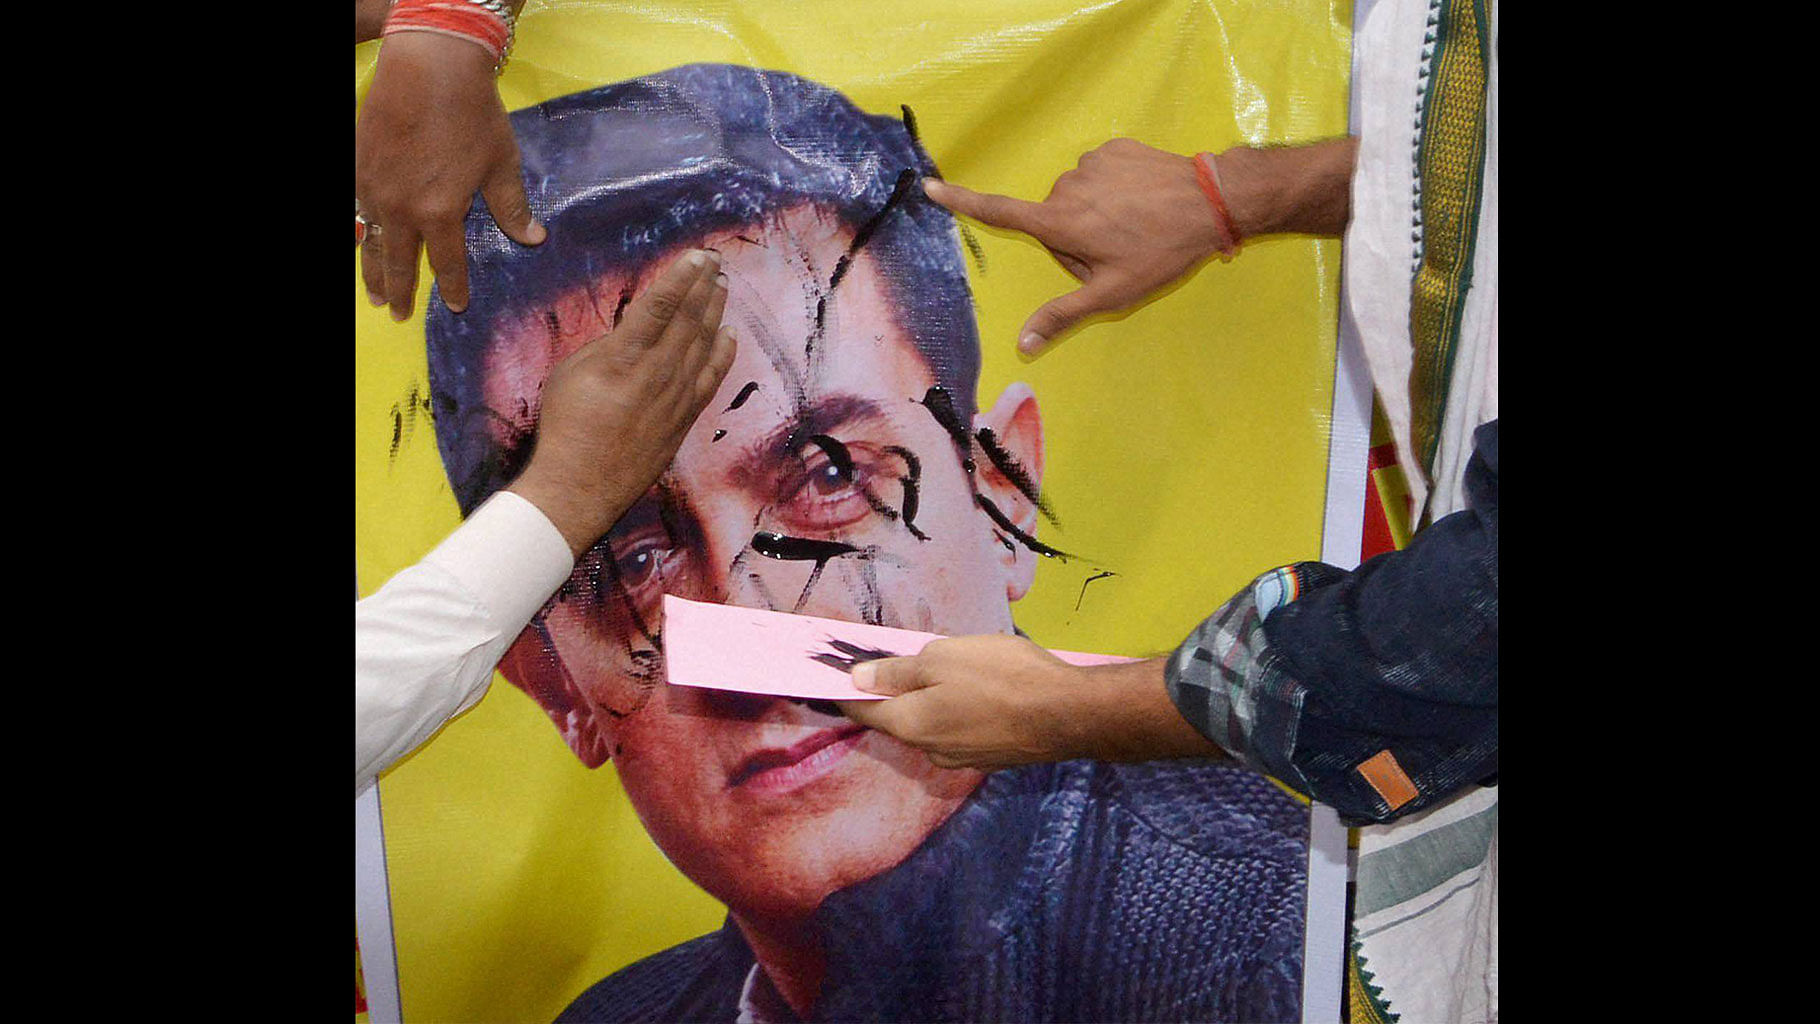  BJP workers putting black ink on a poster of Actor Amir khan during a protest against his statement. (Photo: PTI)